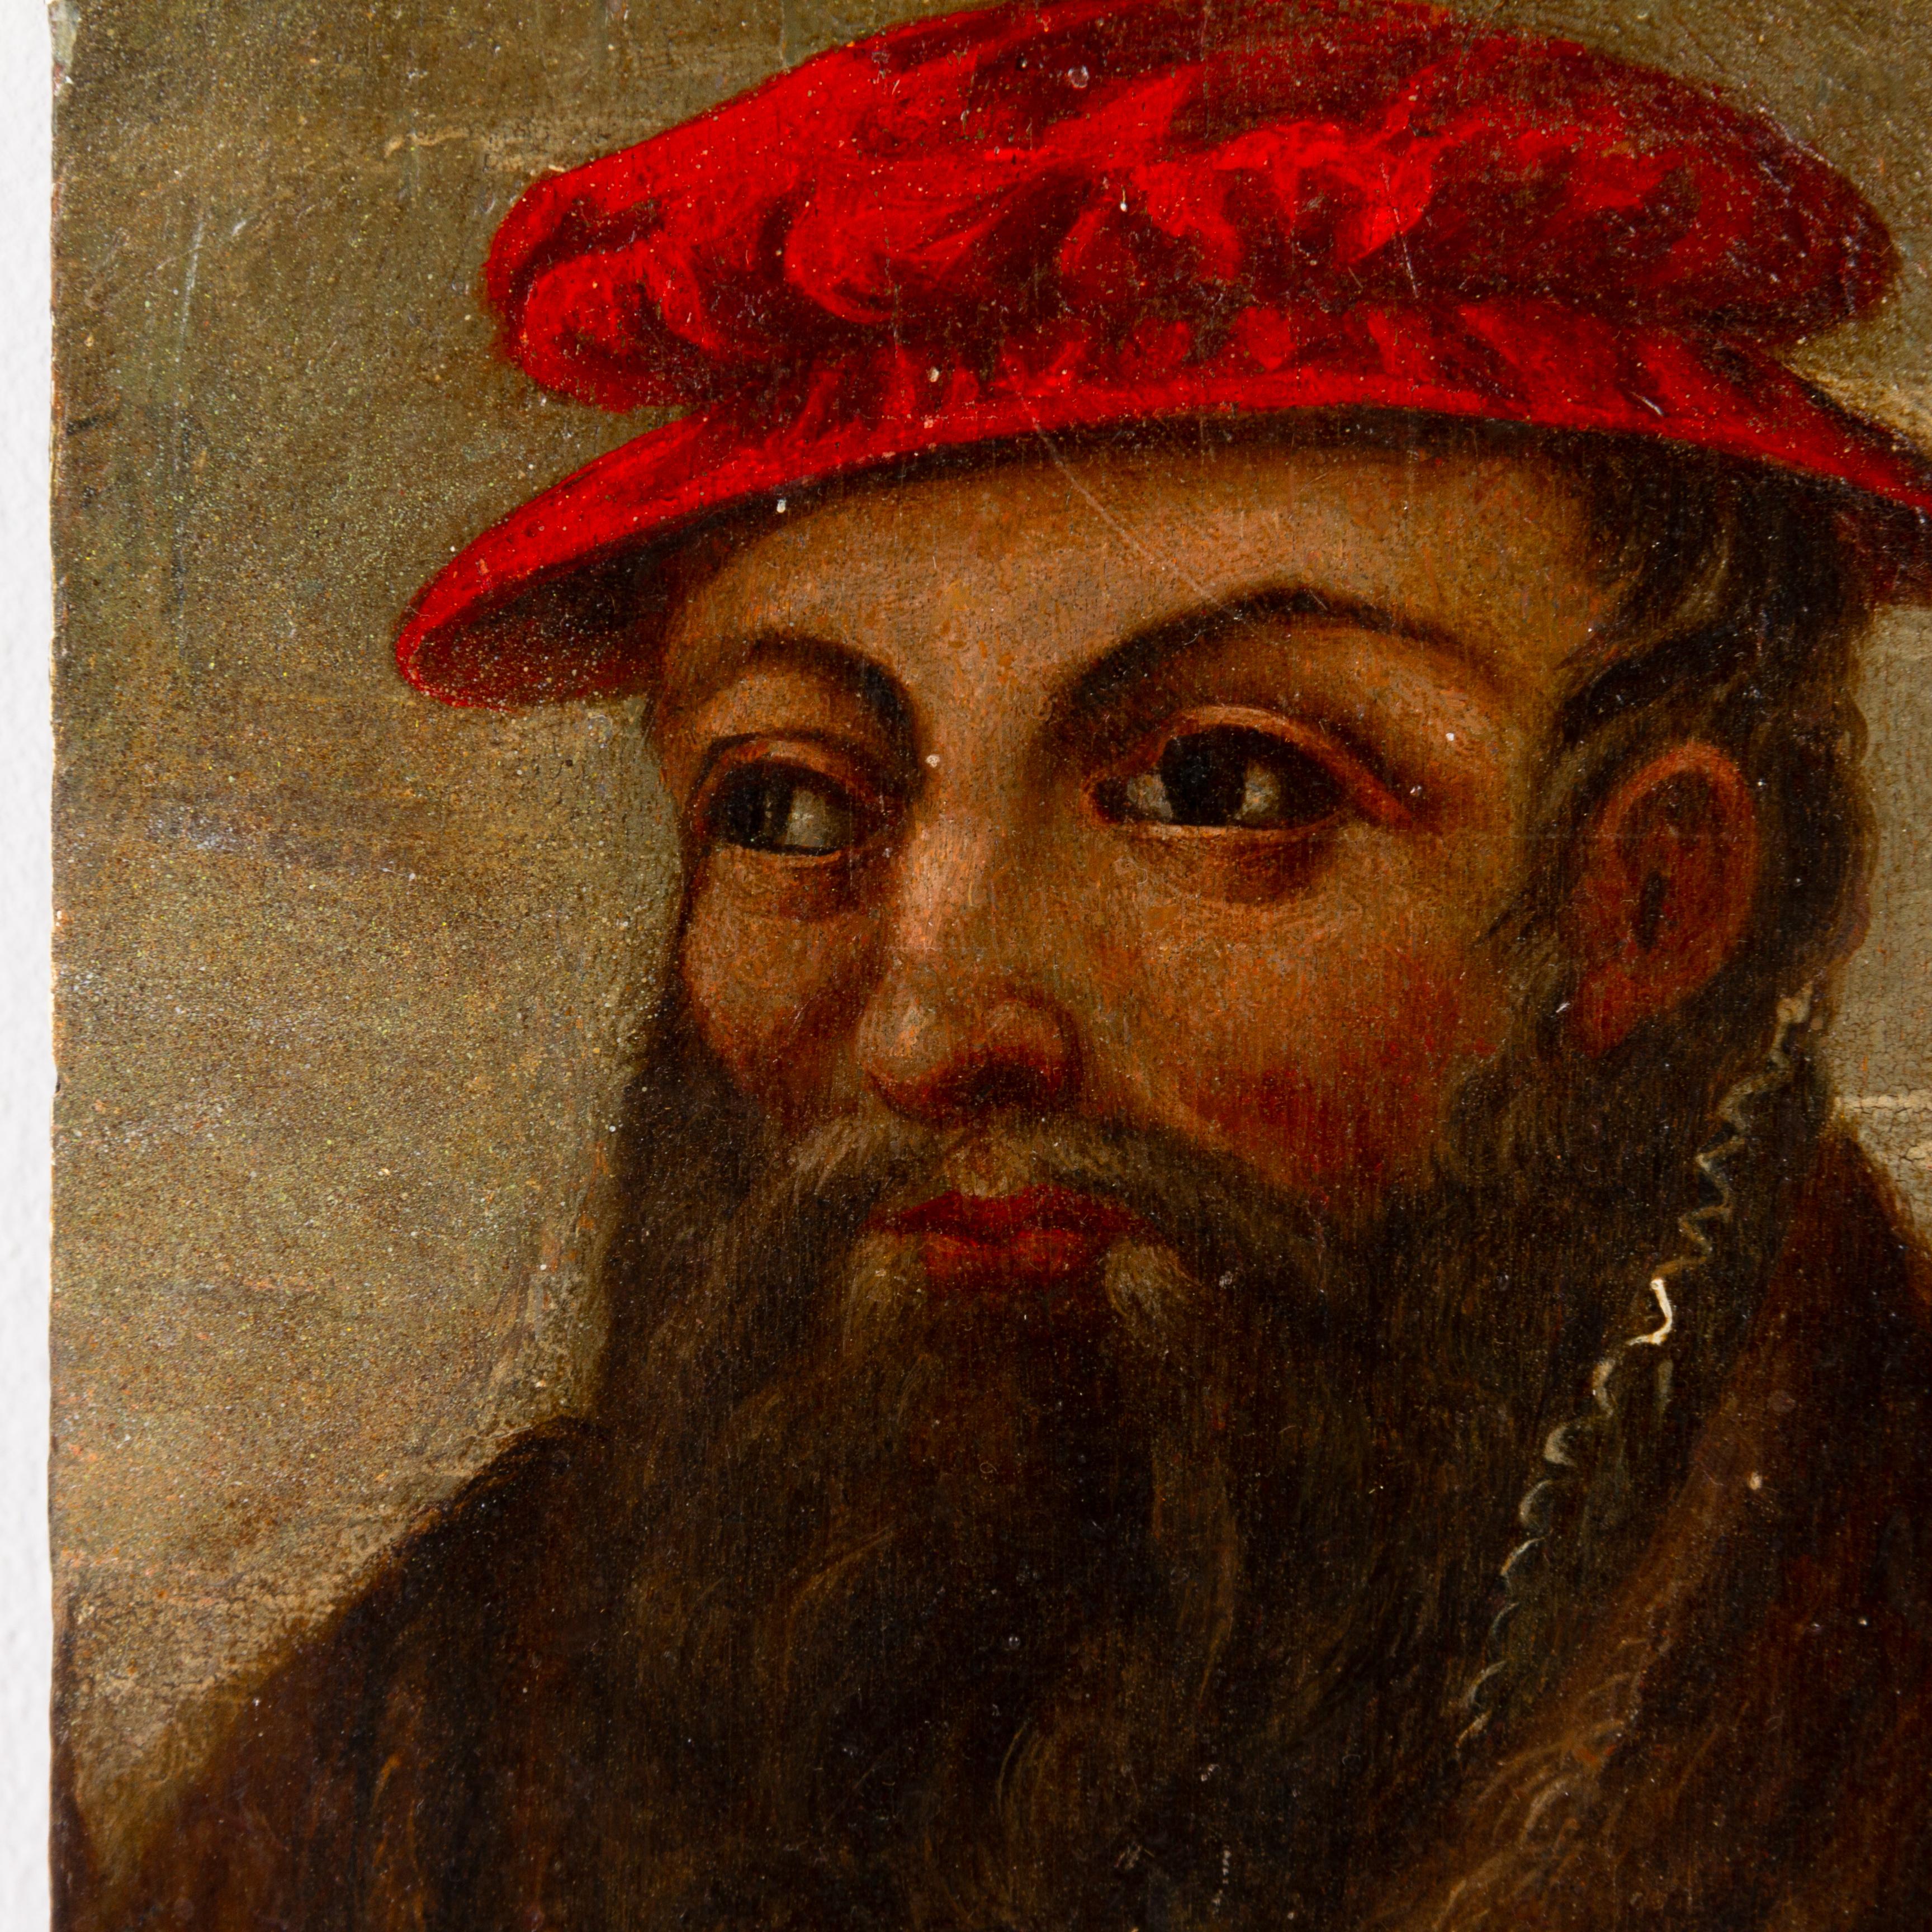 In good condition
From a private collection
Free international shipping
17th Century Old Master Bearded Man Portrait Oil Painting on Panel
